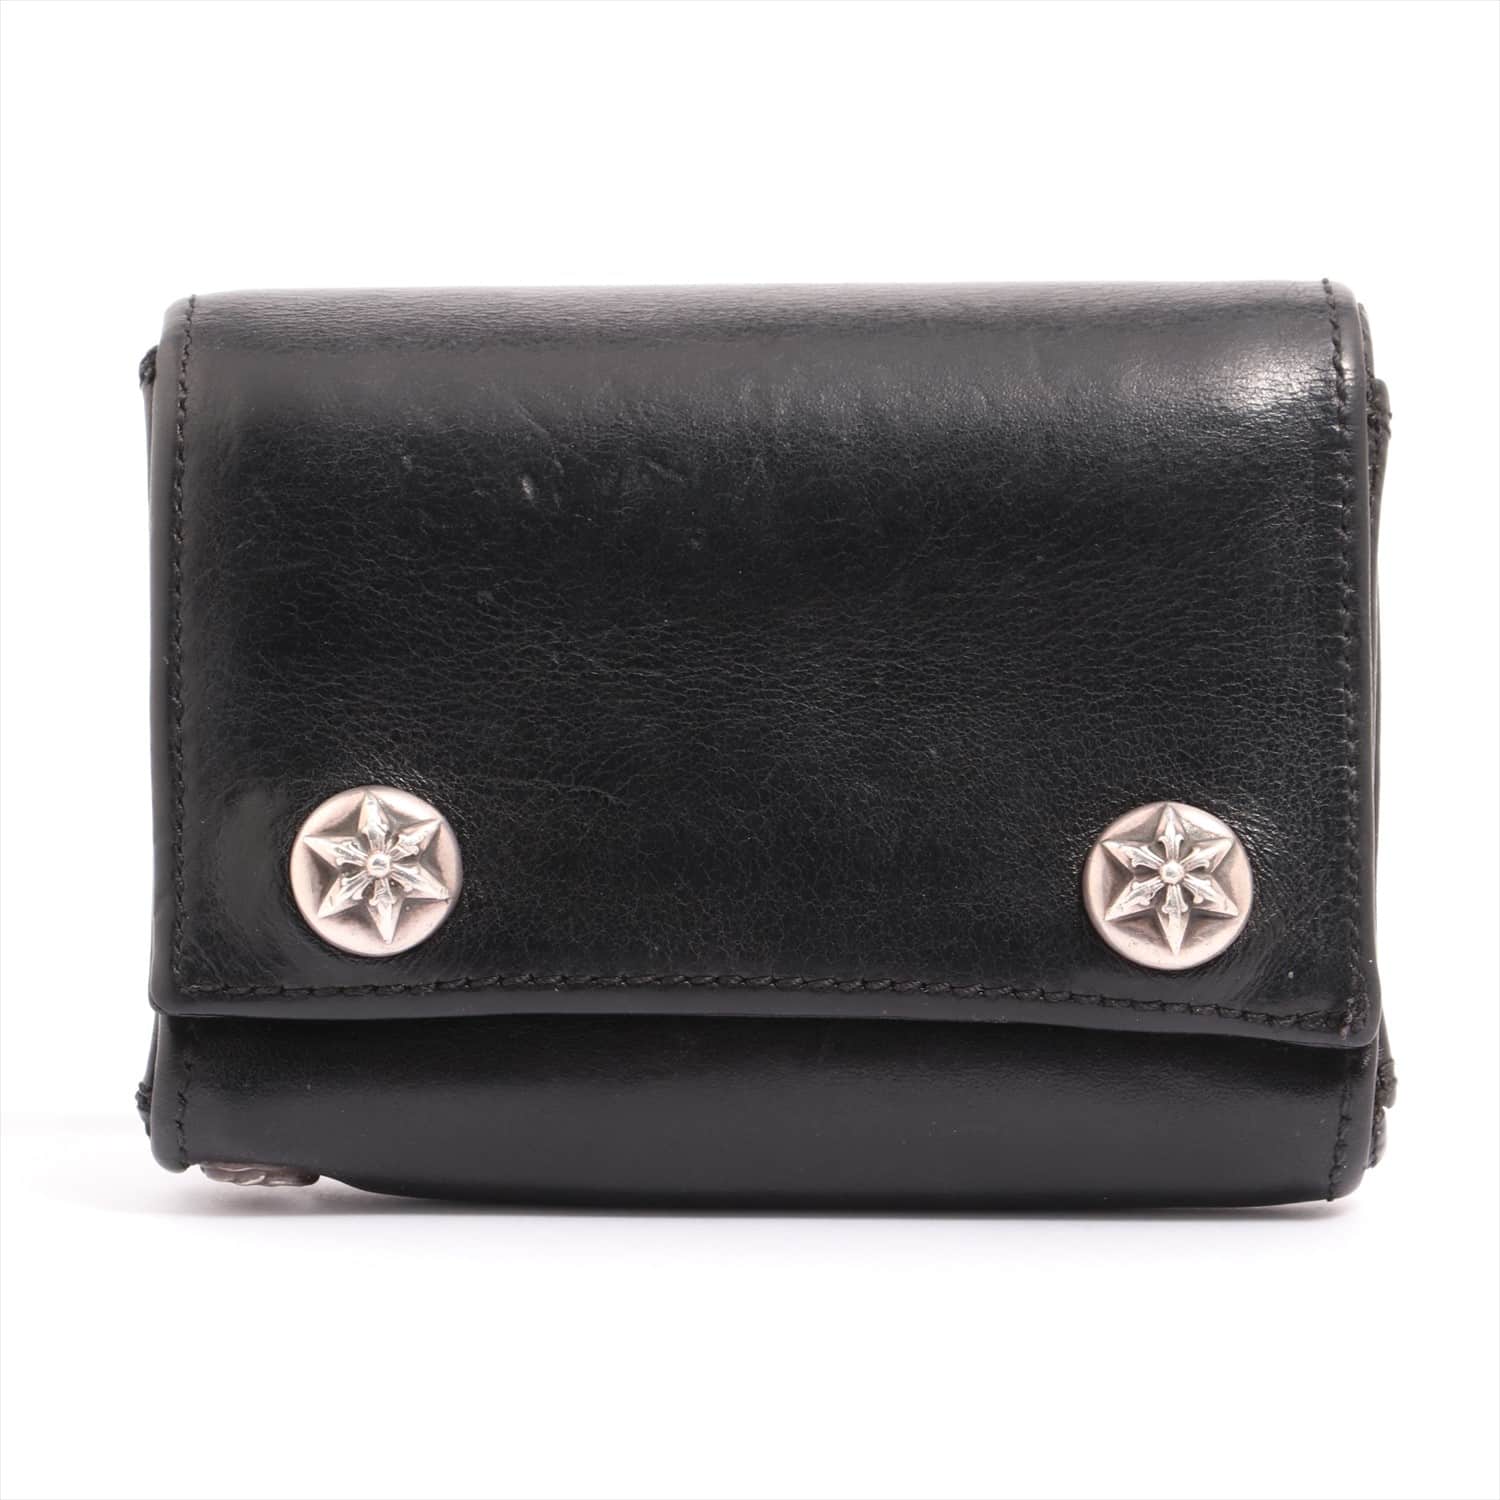 Chrome Hearts 3 Fold Wallet Wallet Leather Star button